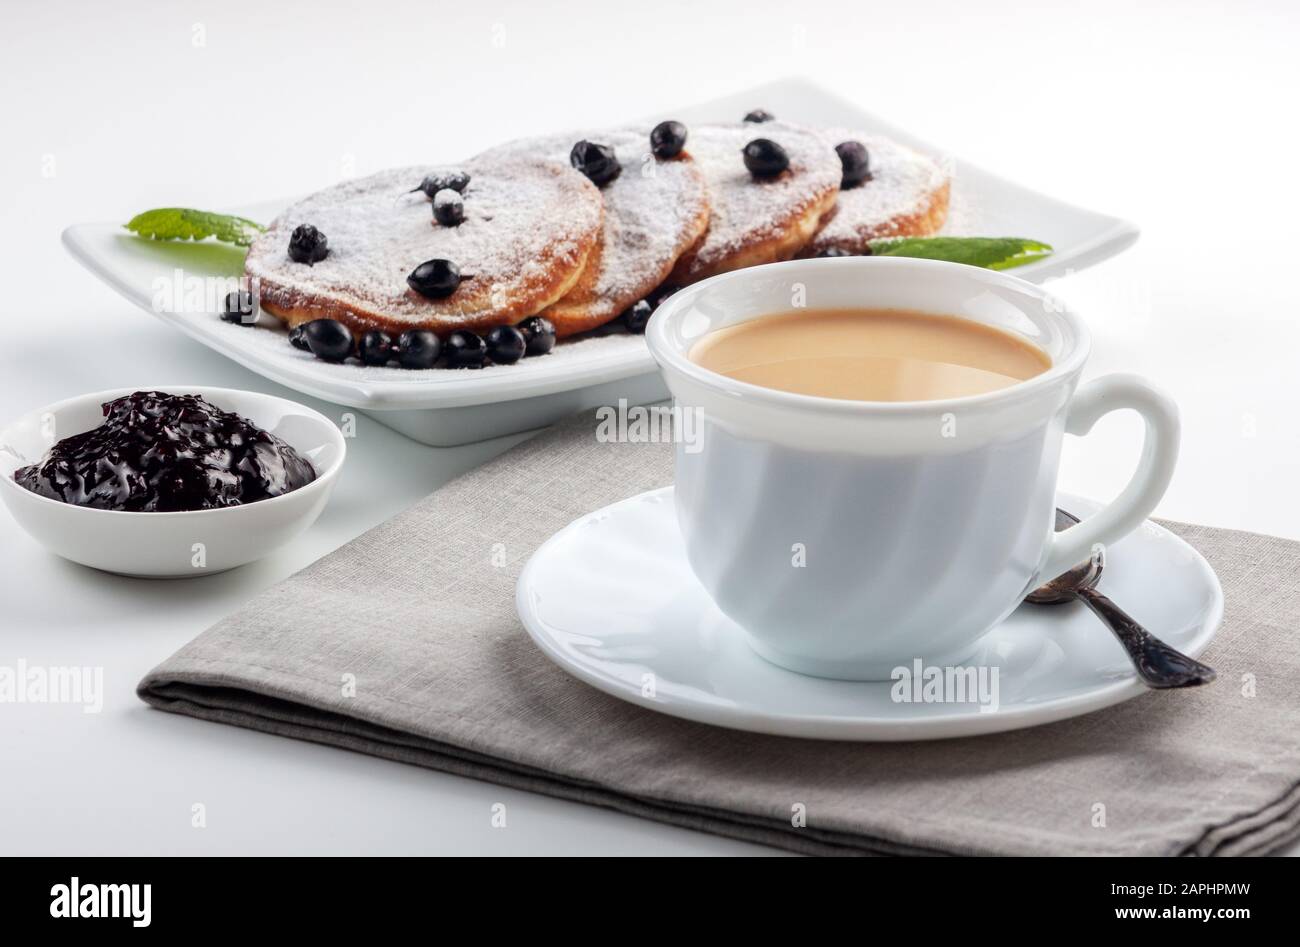 A Cup of coffee with milk and a plate with a pancakes is on the table. Stock Photo